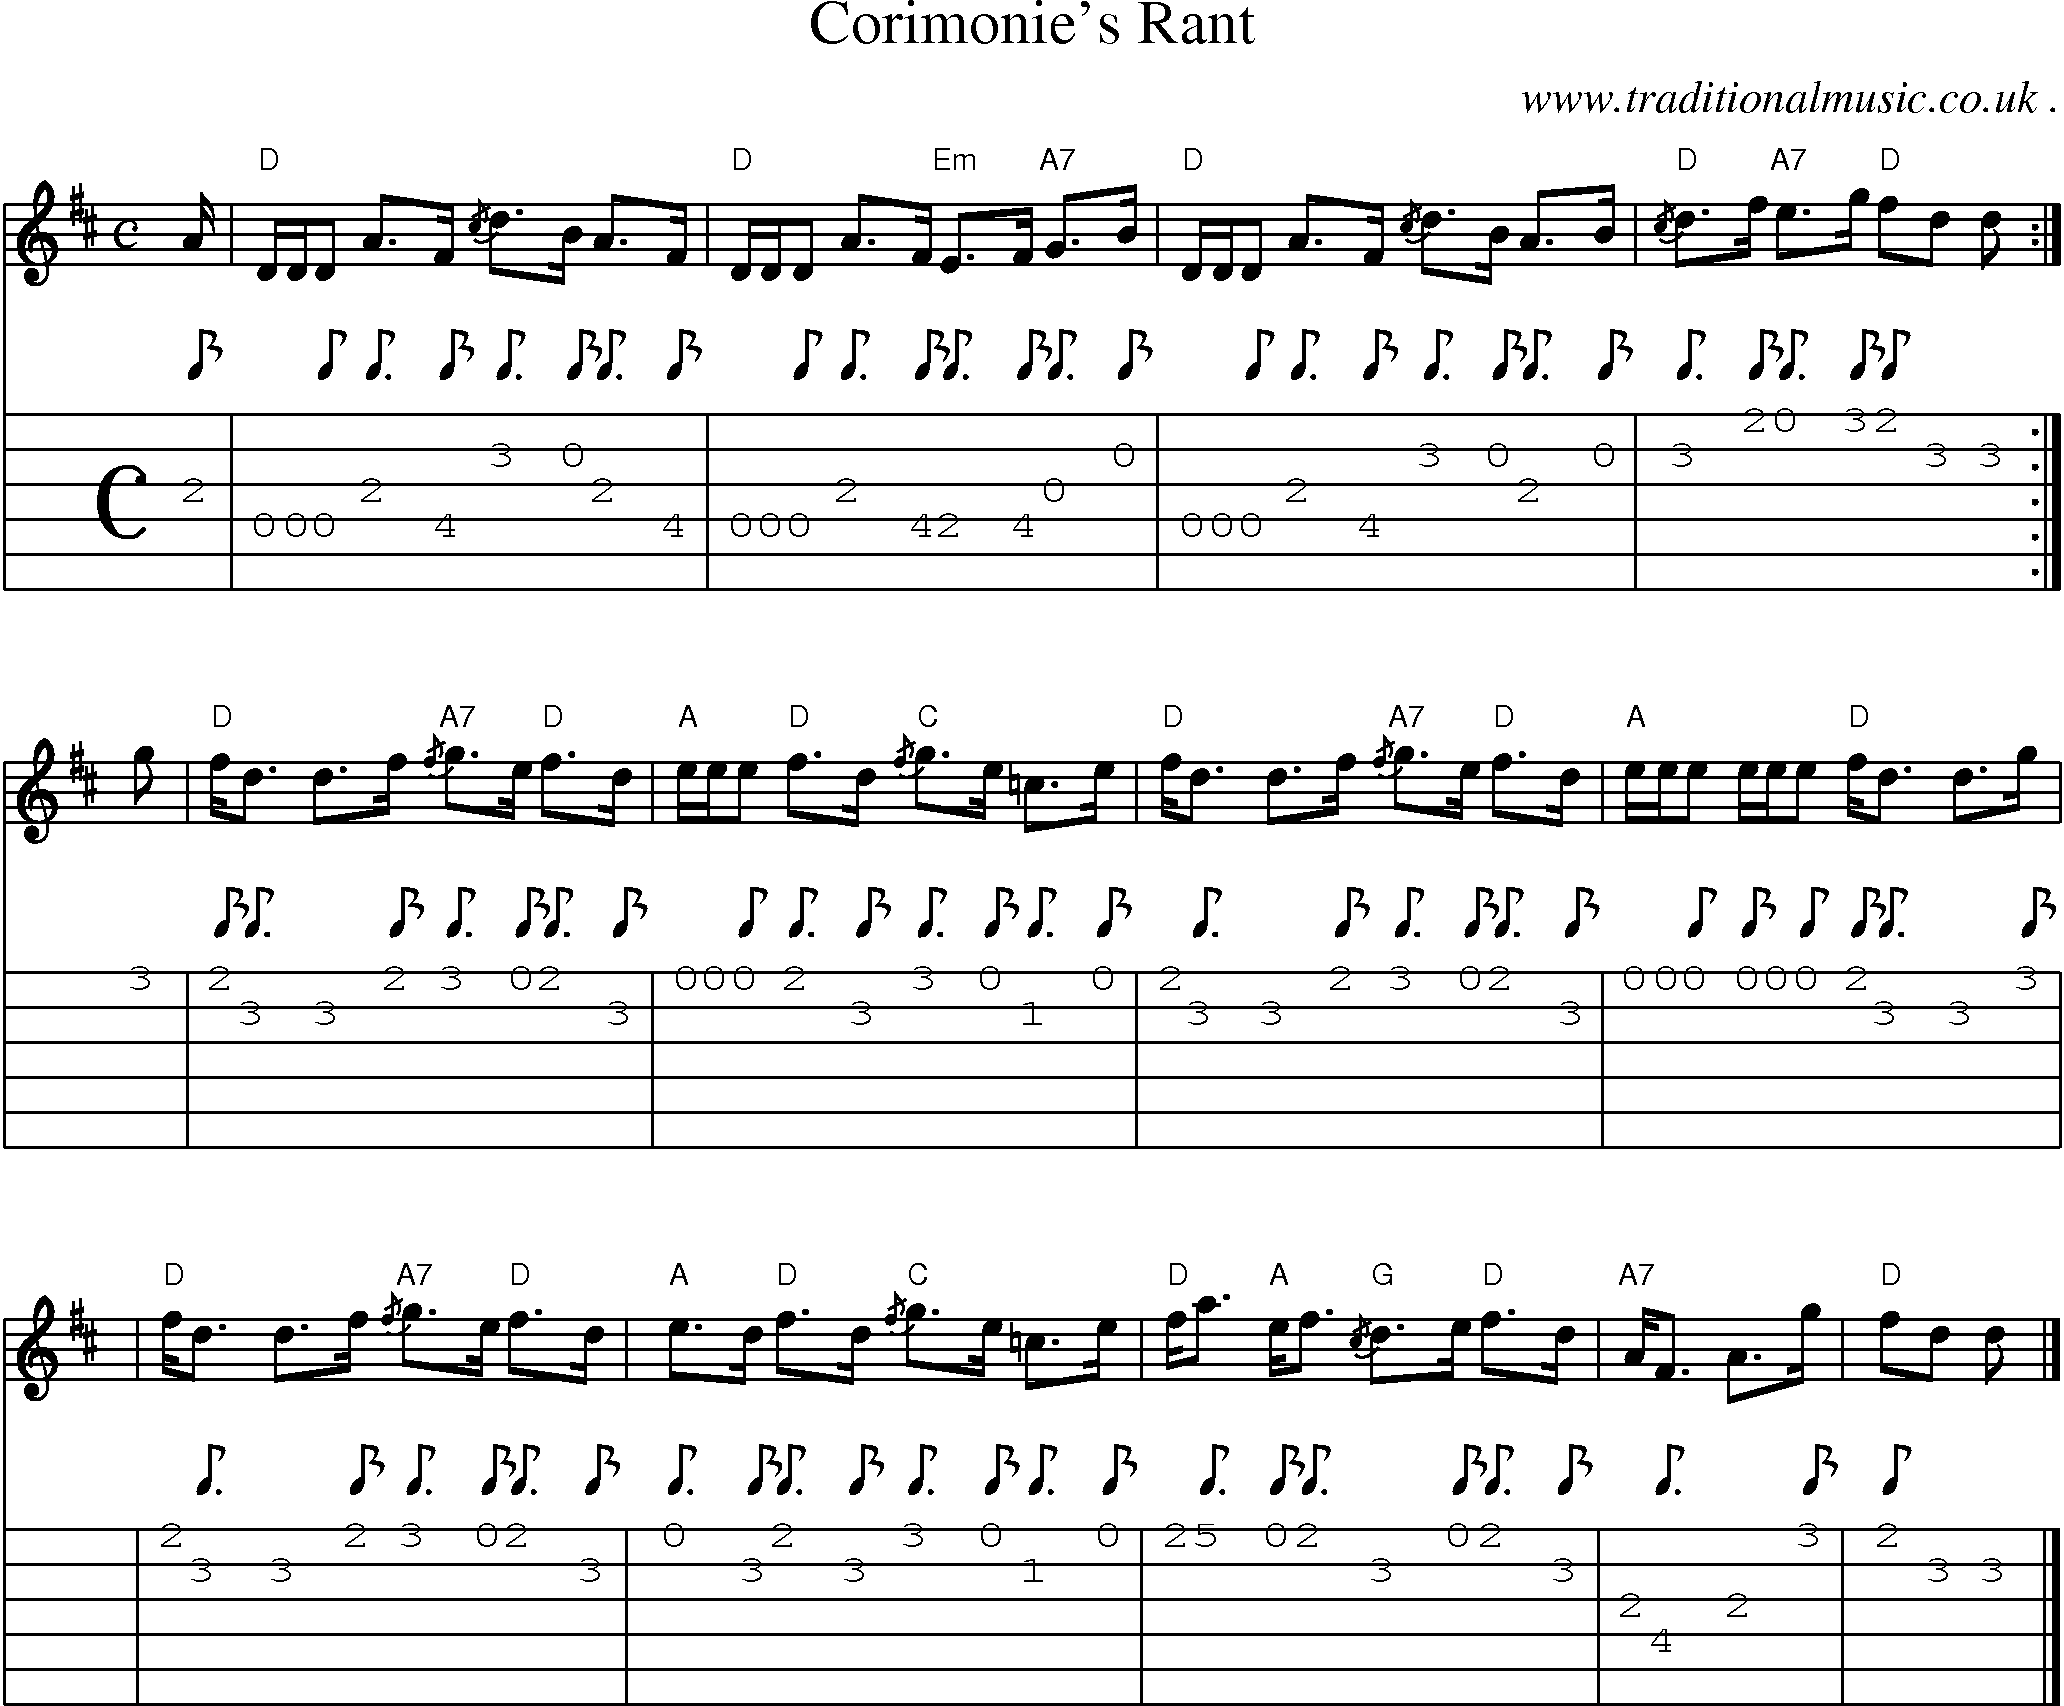 Sheet-music  score, Chords and Guitar Tabs for Corimonies Rant